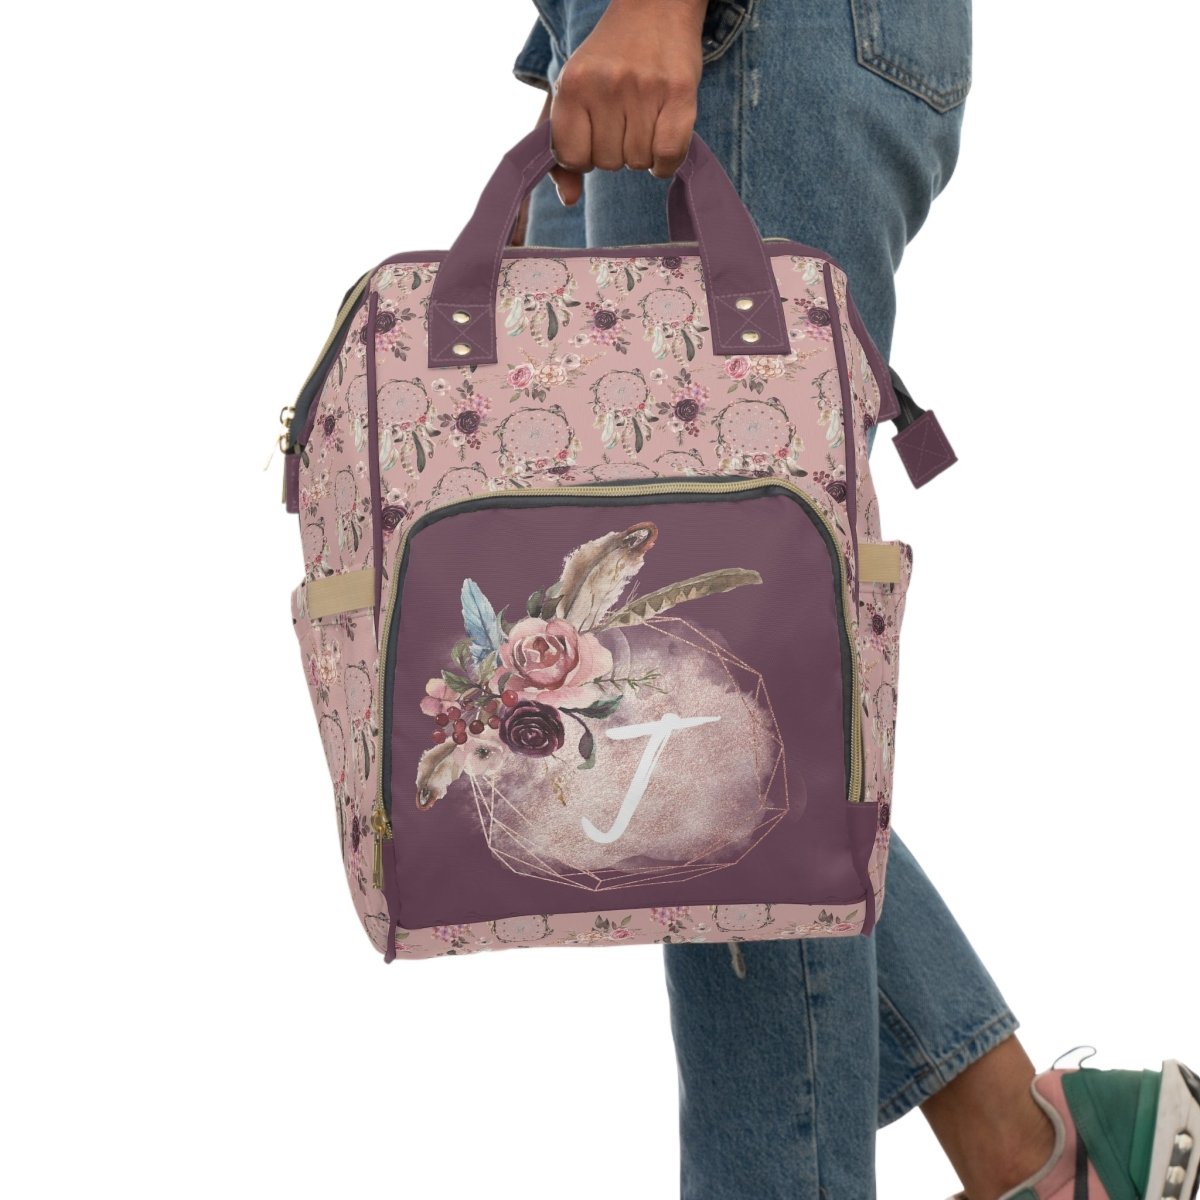 Floral Dreamcatcher Personalized Backpack Diaper Bag - Floral Dreamcatcher, gender_girl, text